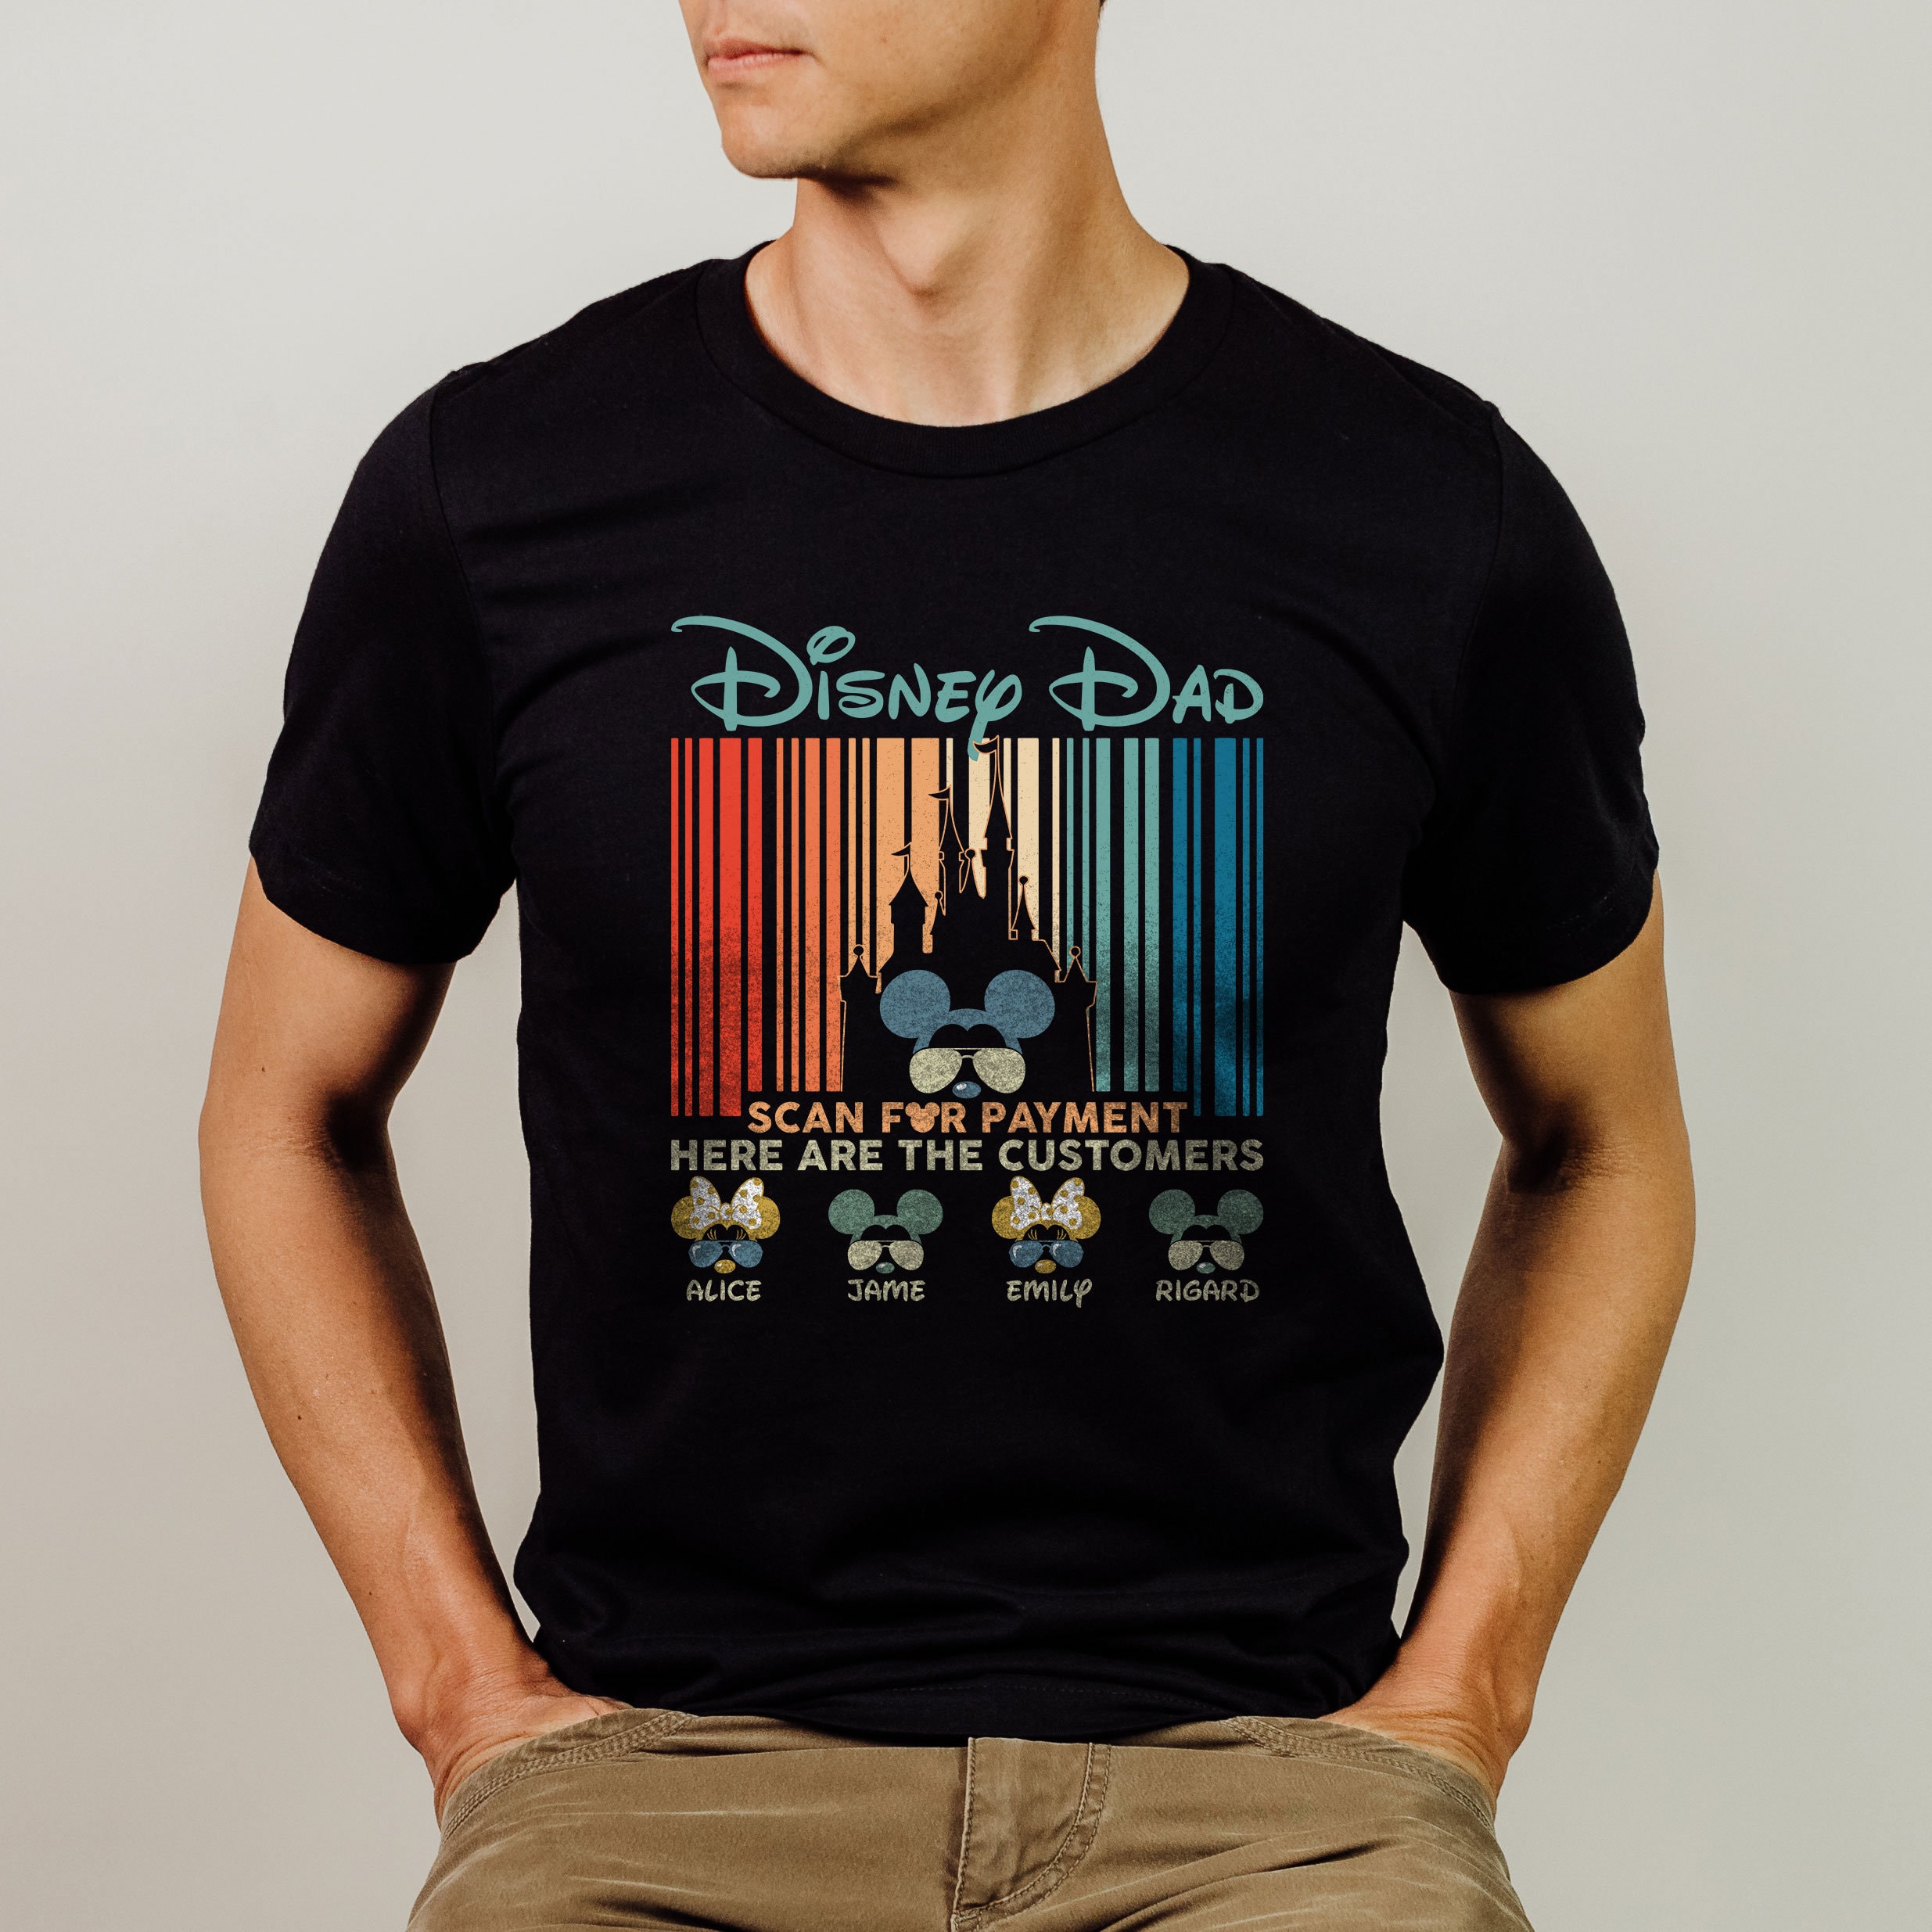 Disney Dad Scan For Payment Shirt